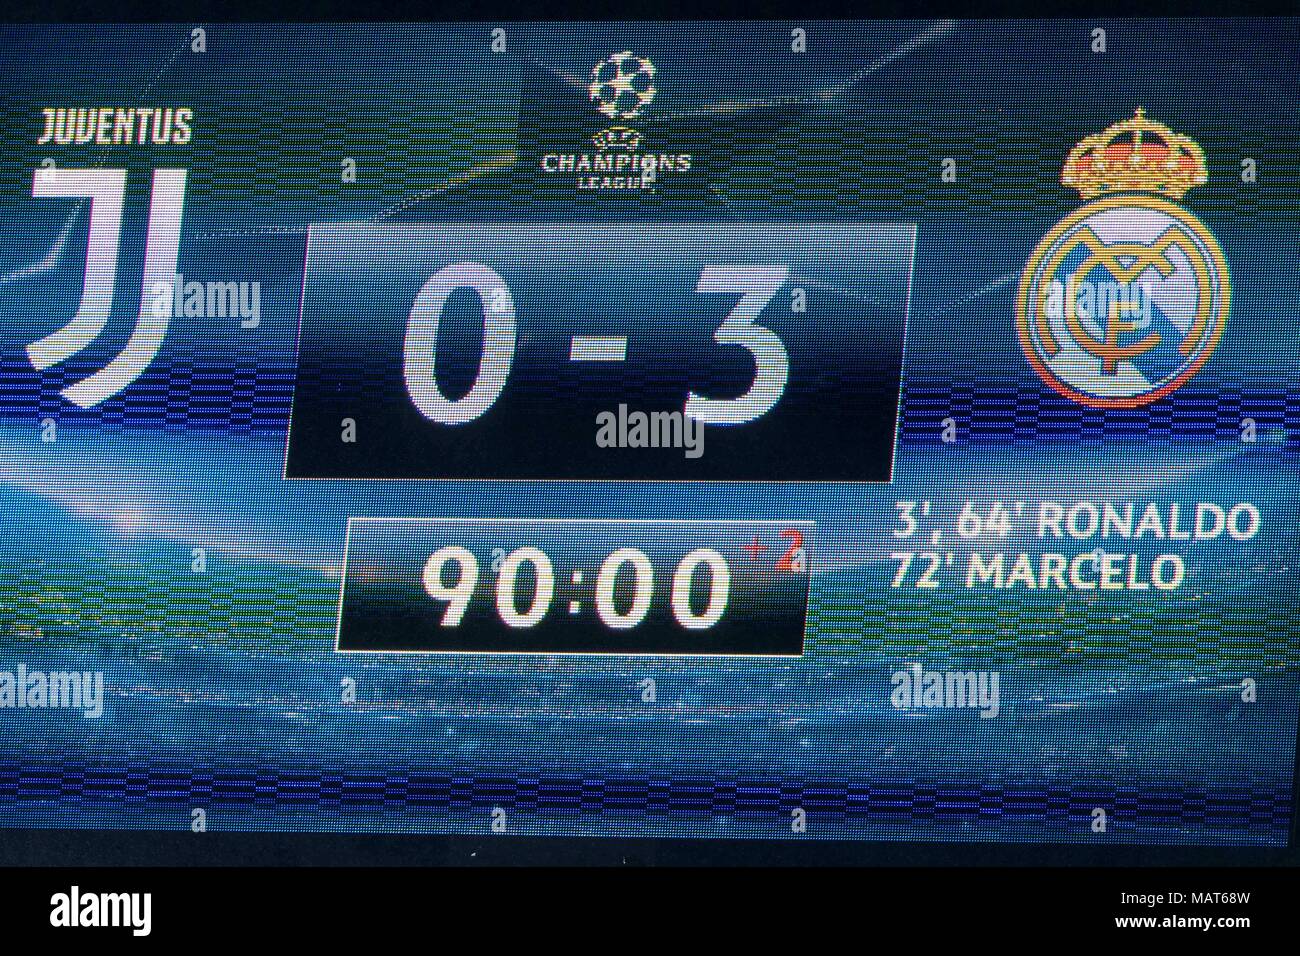 champions league today match result